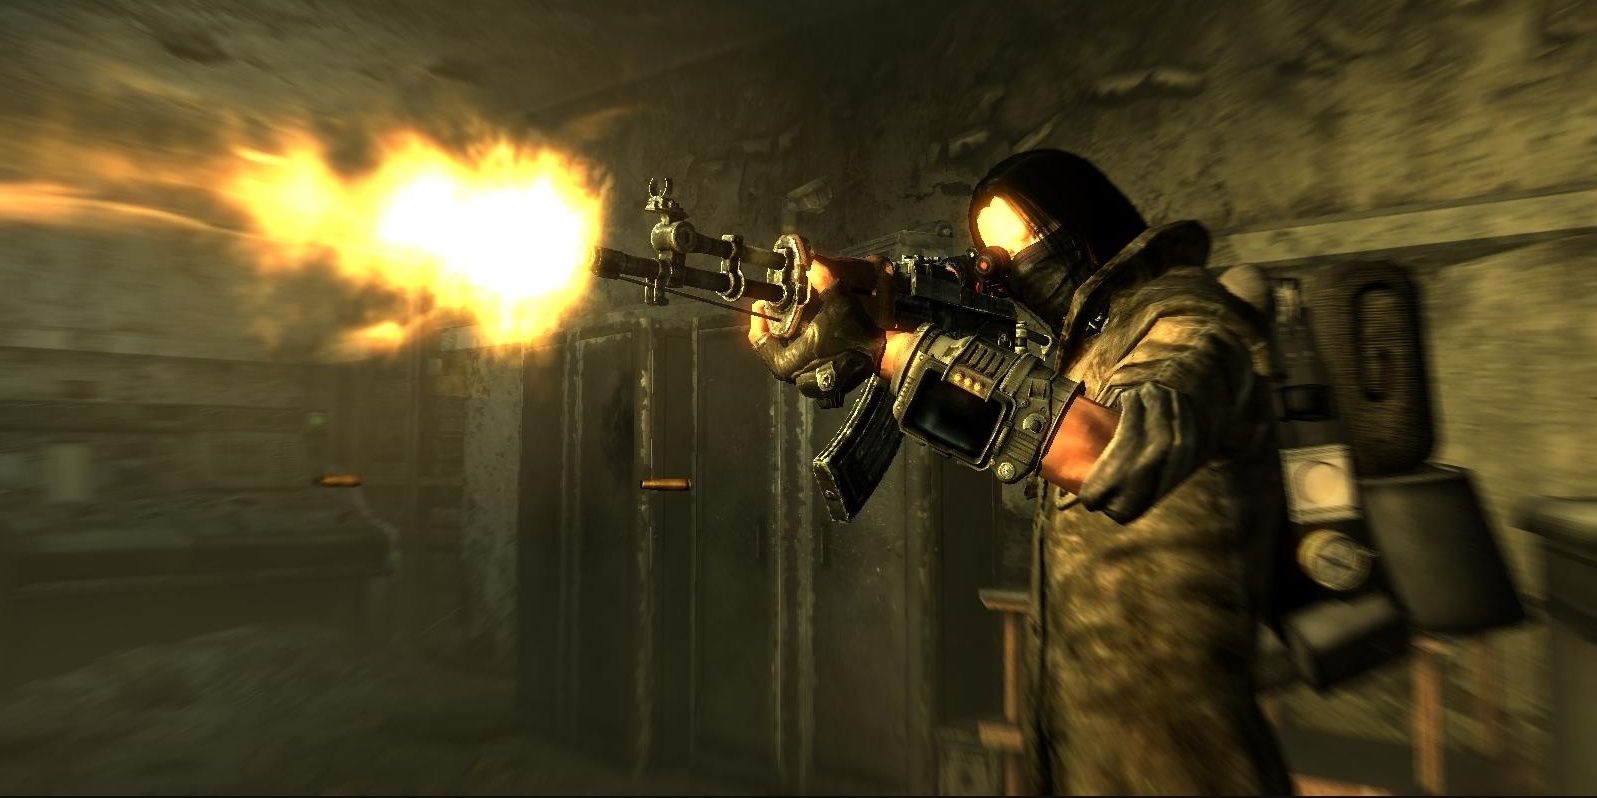 A look at a new shooting pose in the Fallout 3 Reanimated Mod